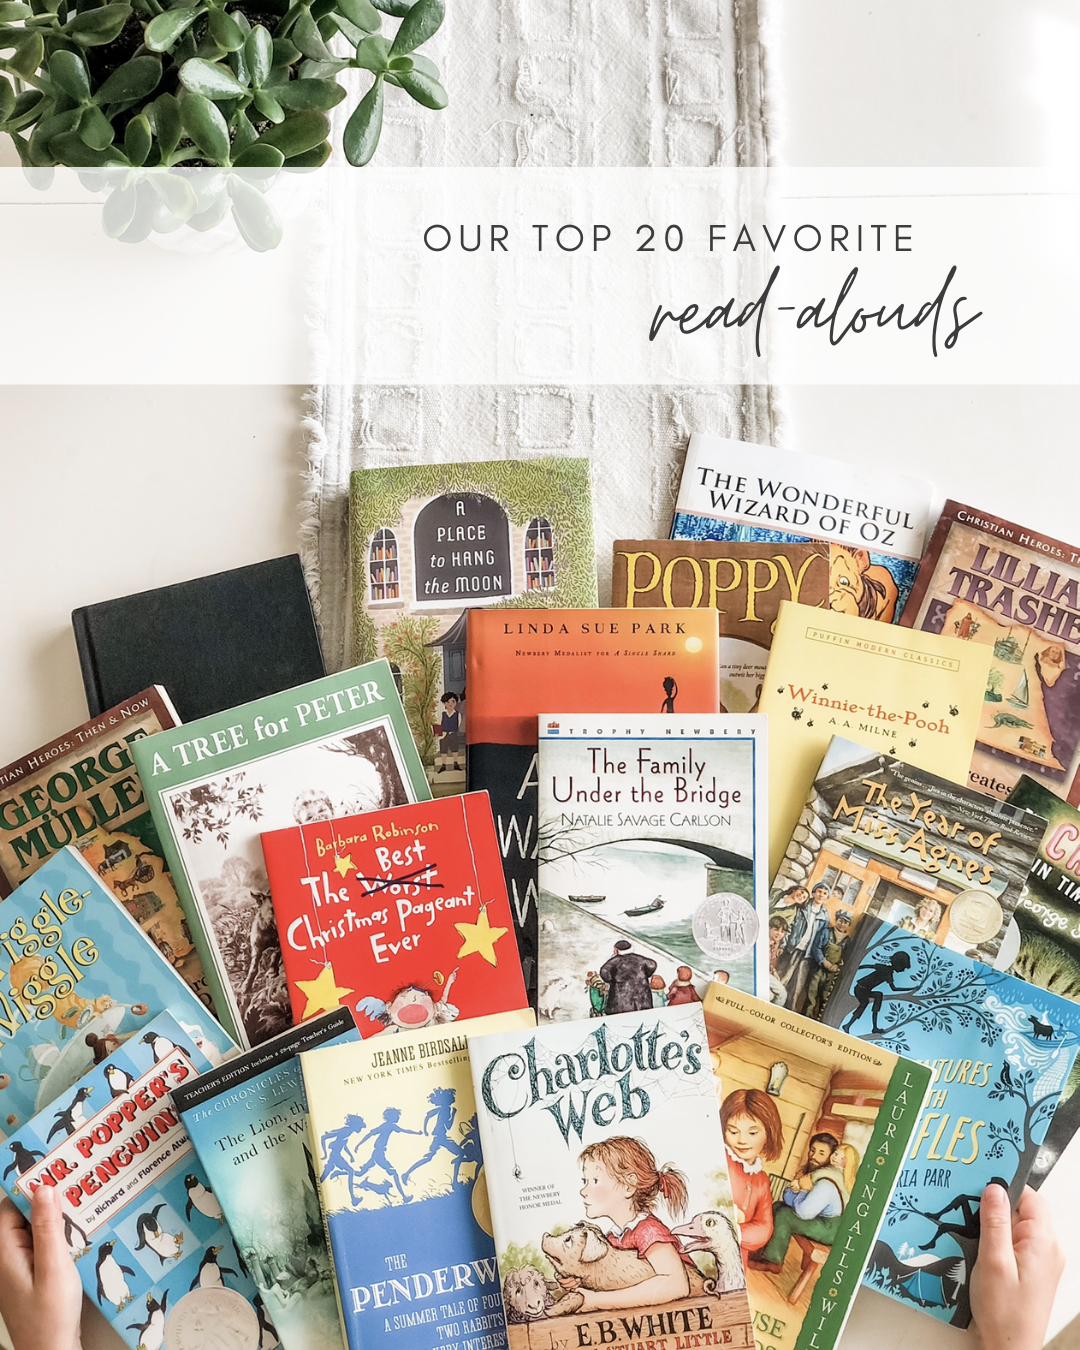 Our Top 20 Favorite Read-Alouds (so far)